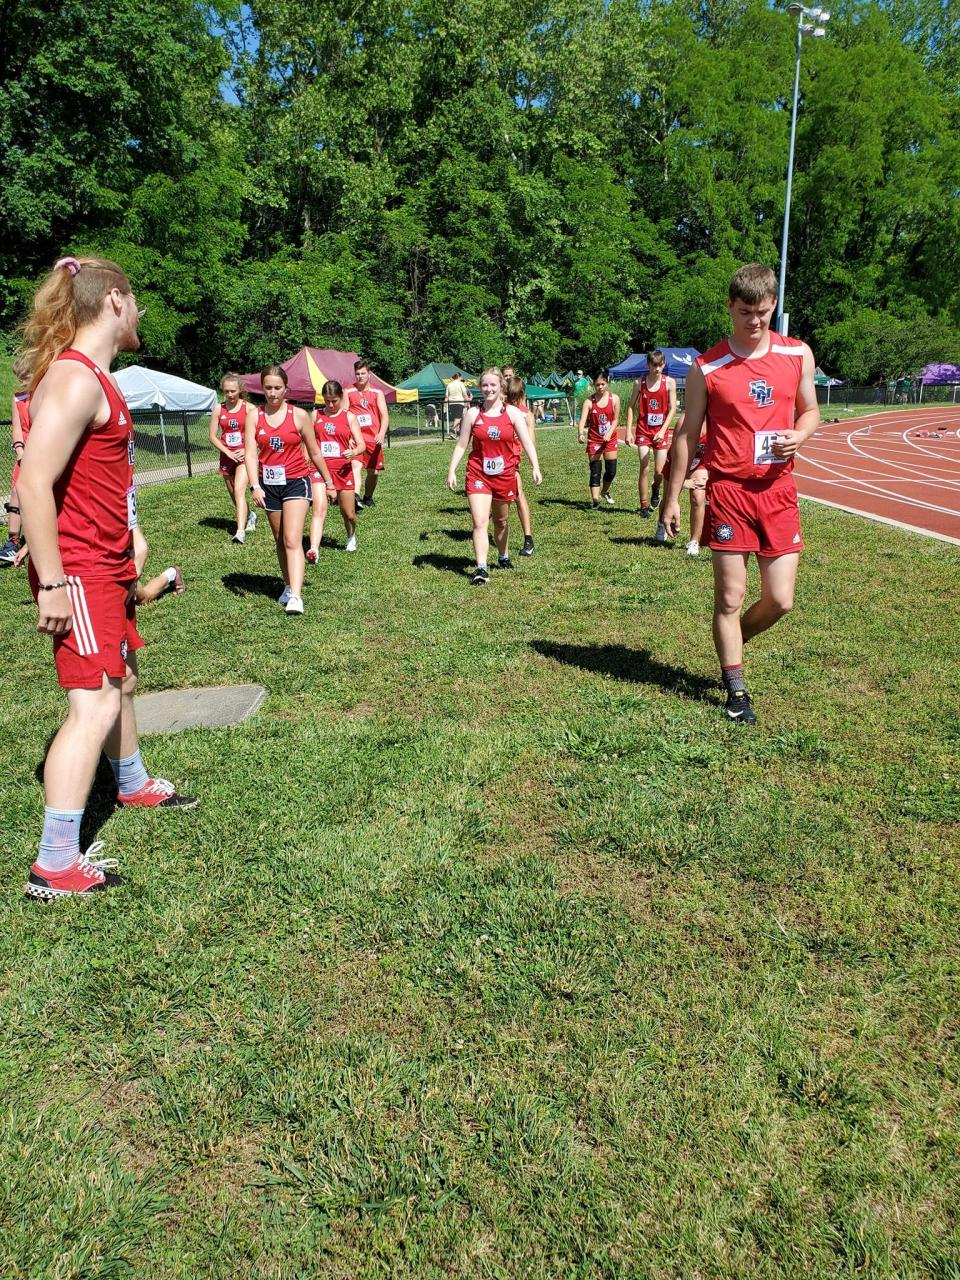 BNL seniors Gunner Connaughton (left) and Tanner Robbins (right) lead the BNL Unified Track & Field team to the track Saturday at the IHSAA State Finals. The Stars won the state title by two points over Lafayette Jefferson.